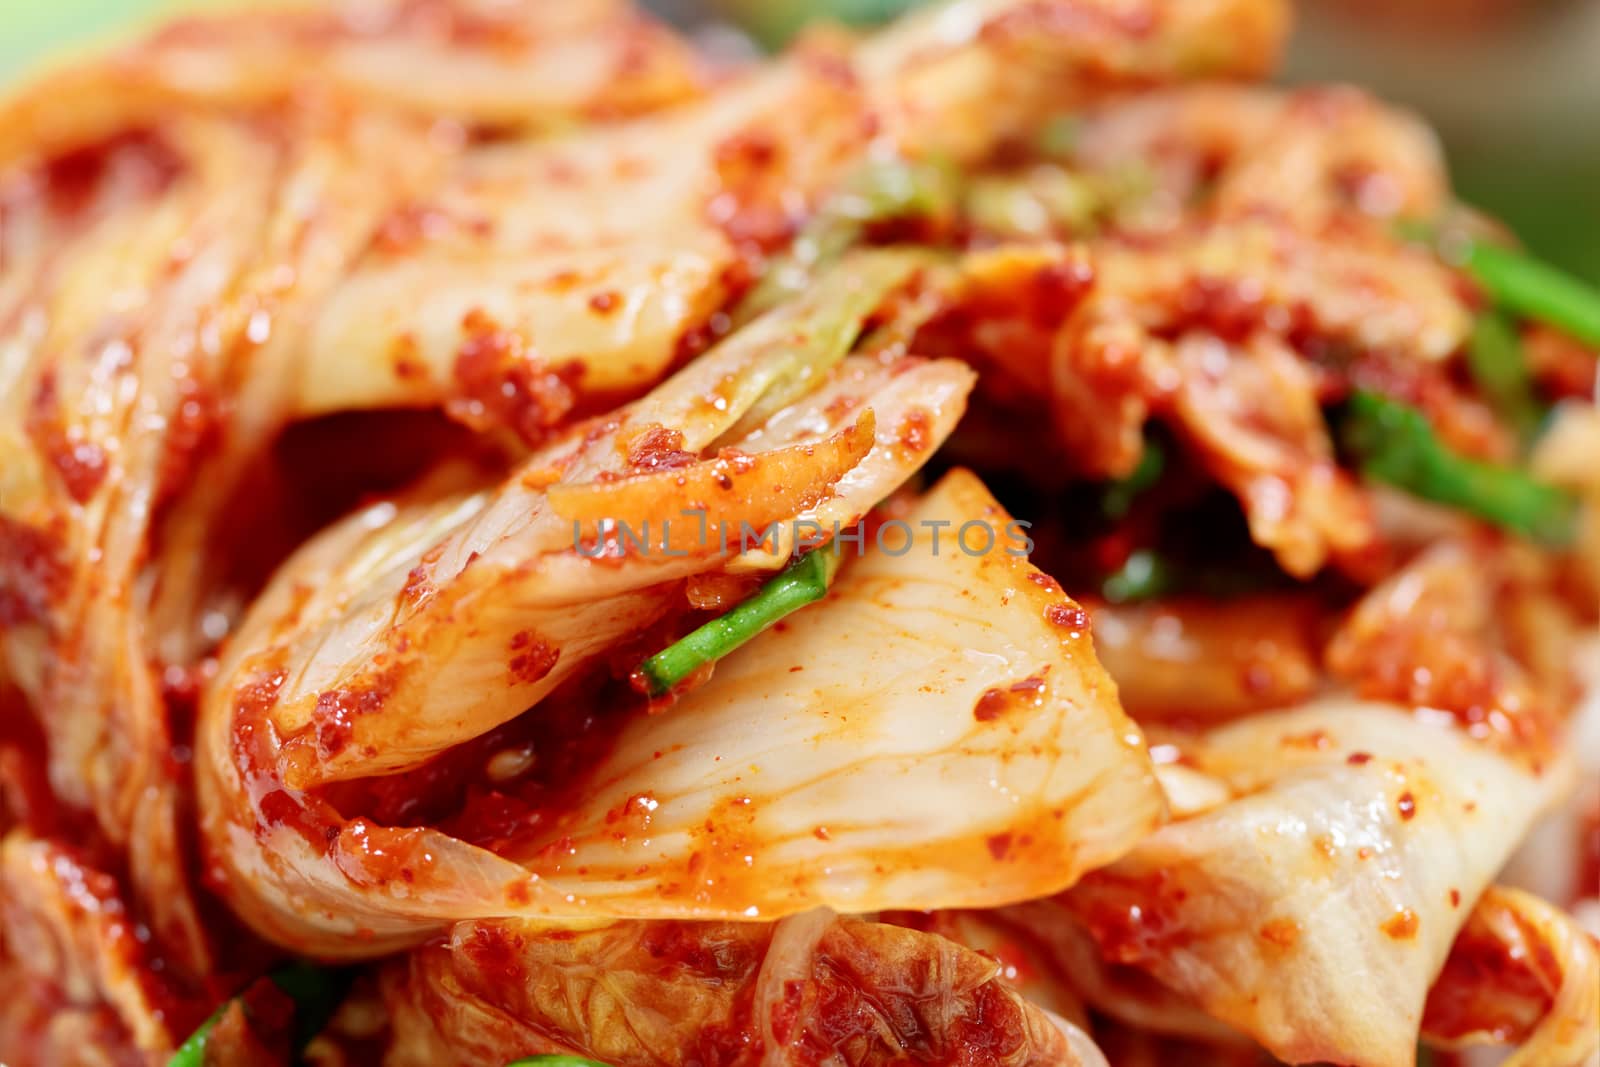 Kimchi (fermented vegetables), Korean Traditional Dish by dsmsoft